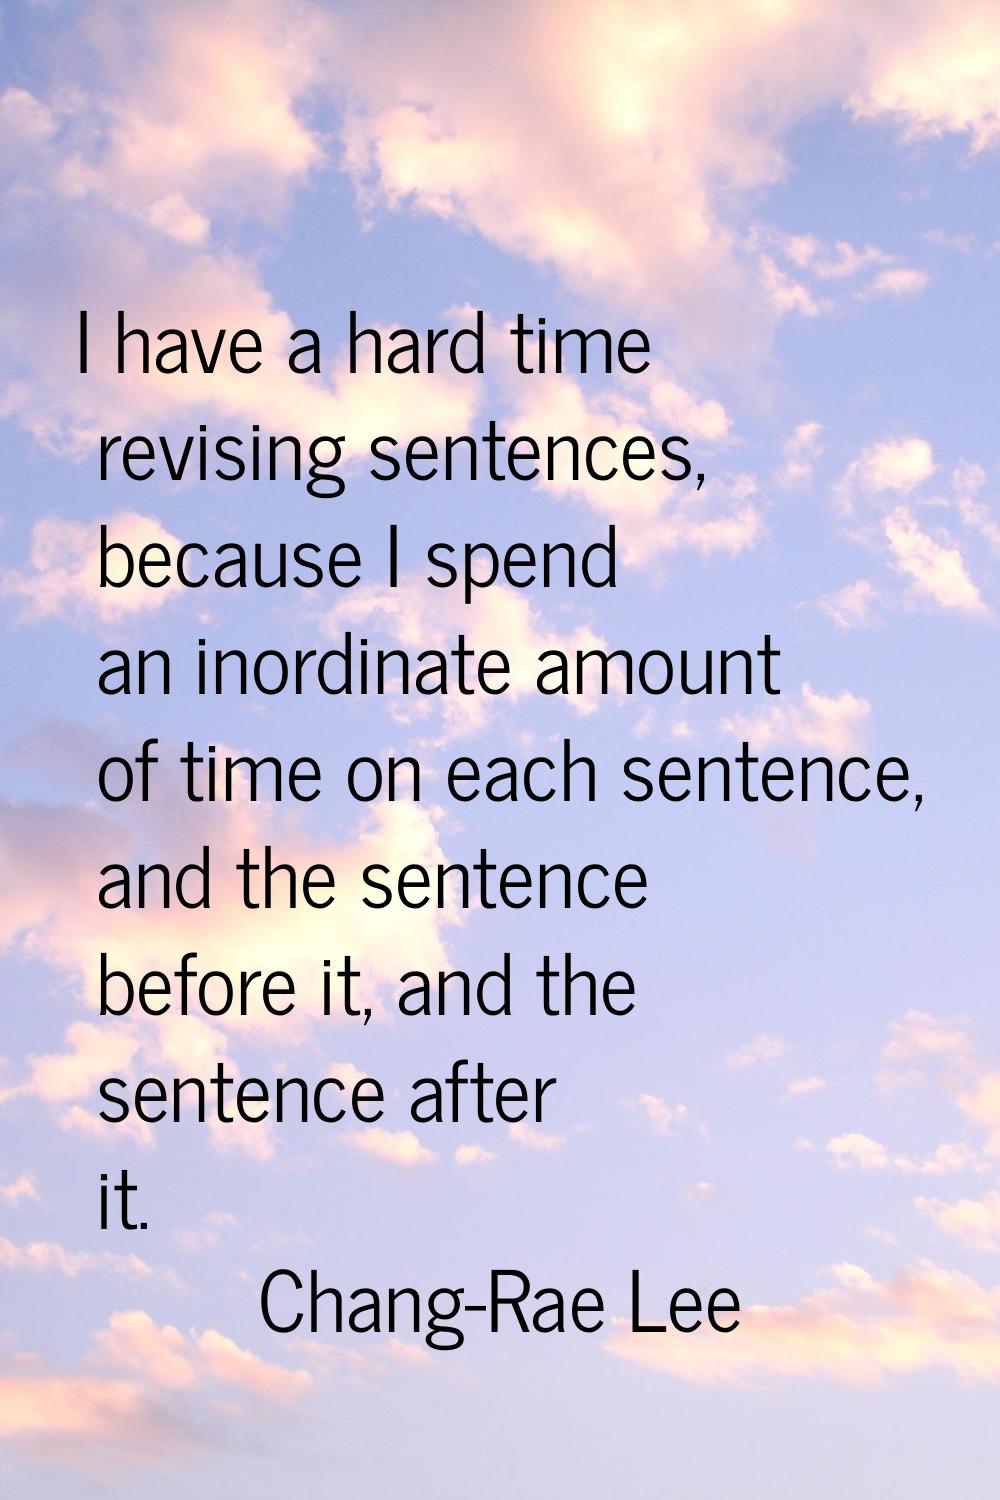 I have a hard time revising sentences, because I spend an inordinate amount of time on each sentenc